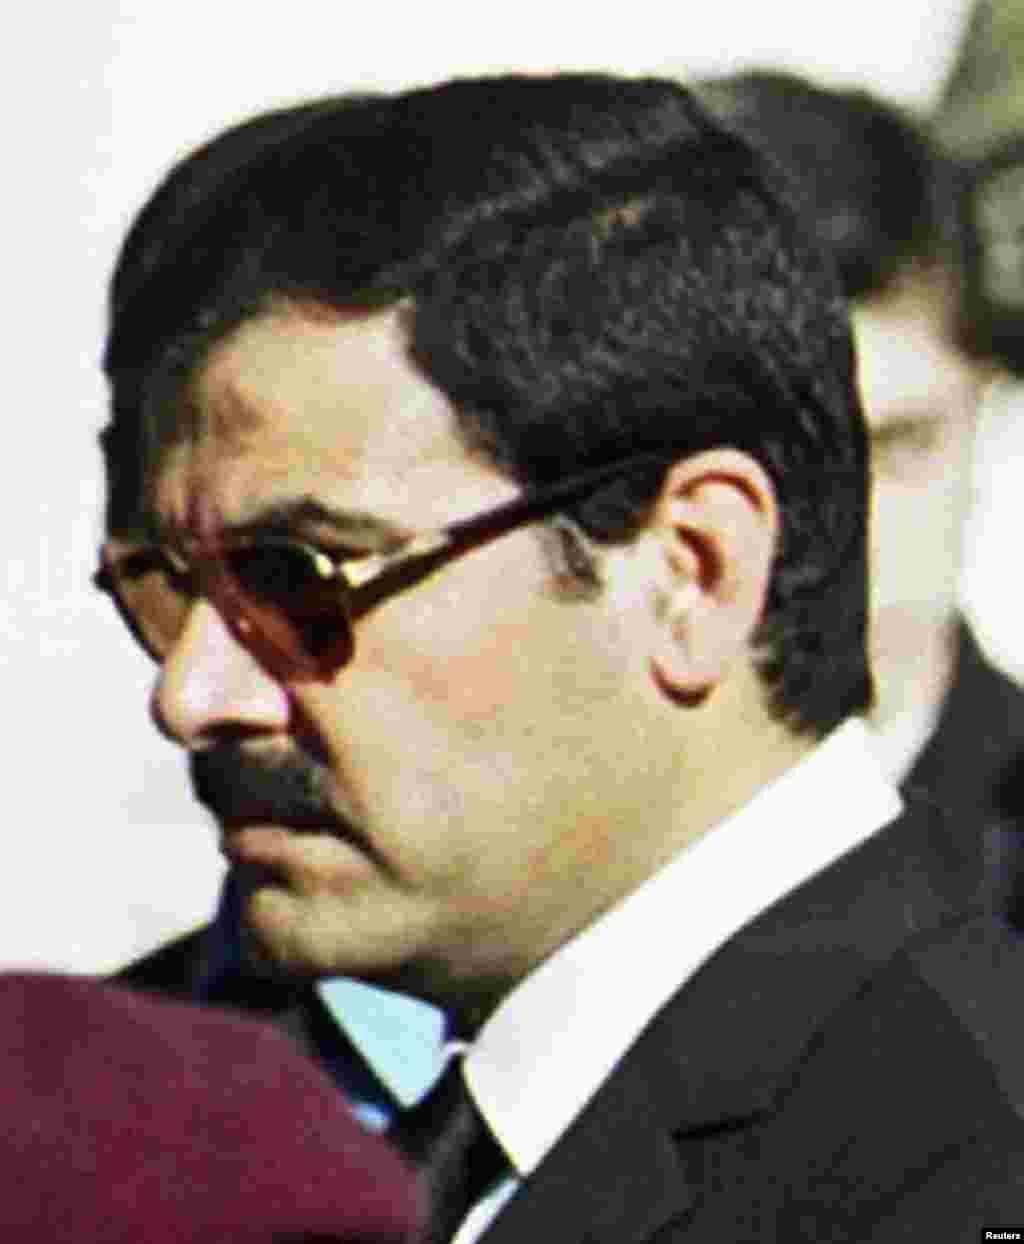 Assef Shawkat, brother-in-law of Syrian President Bashar al-Assad, who was assassinated in Damascus, stands during the funeral of late president Hafez al-Assad in this June 13, 2000 photo.